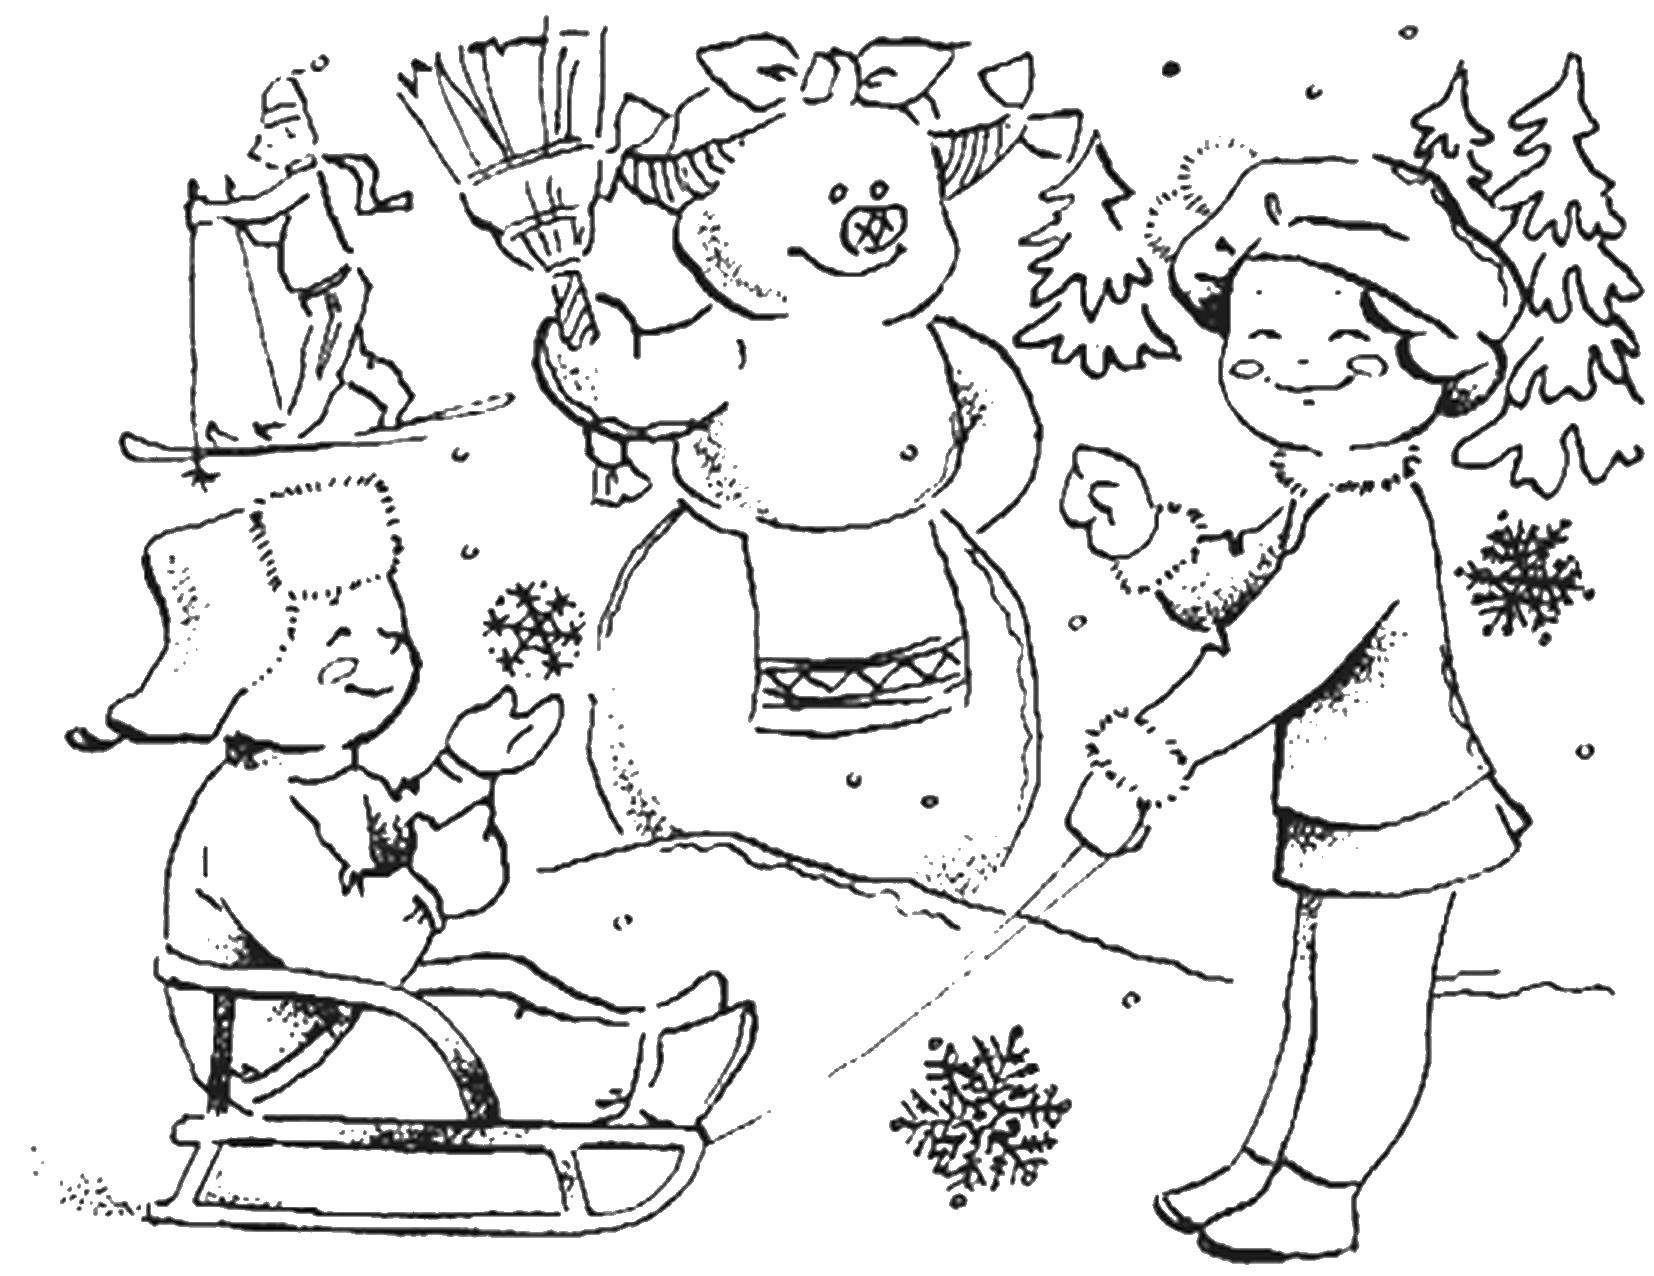 Coloring Winter jam. Category winter. Tags:  Winter, frost, children, snowman, fun, snow.